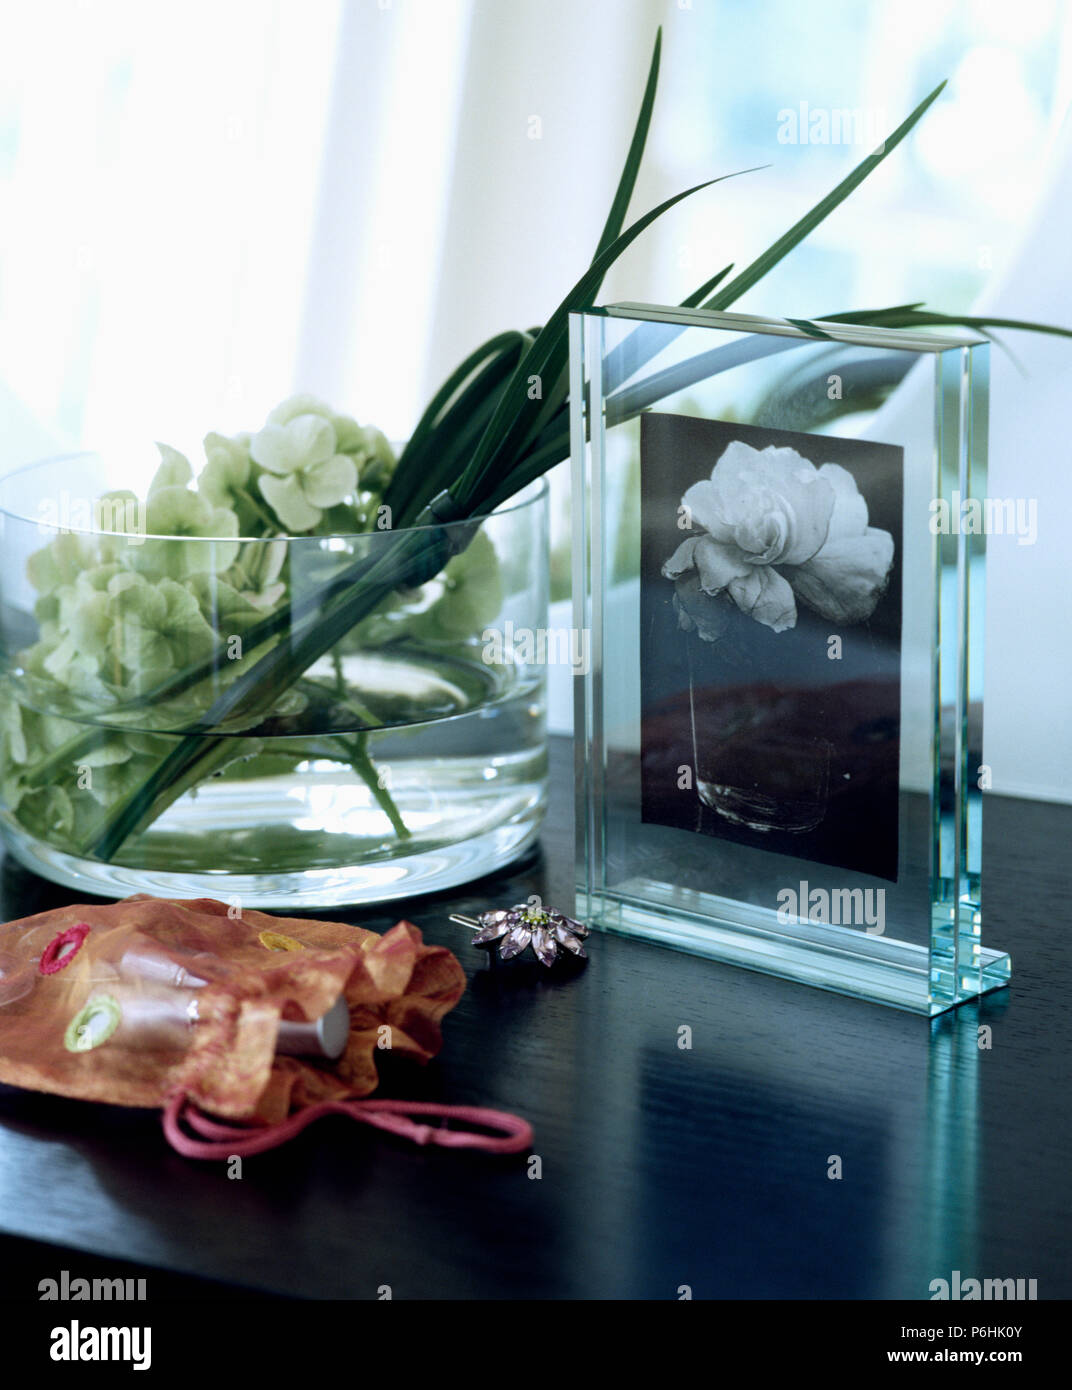 Close-up of glass photograph frame and glass dish with white flowers Stock Photo